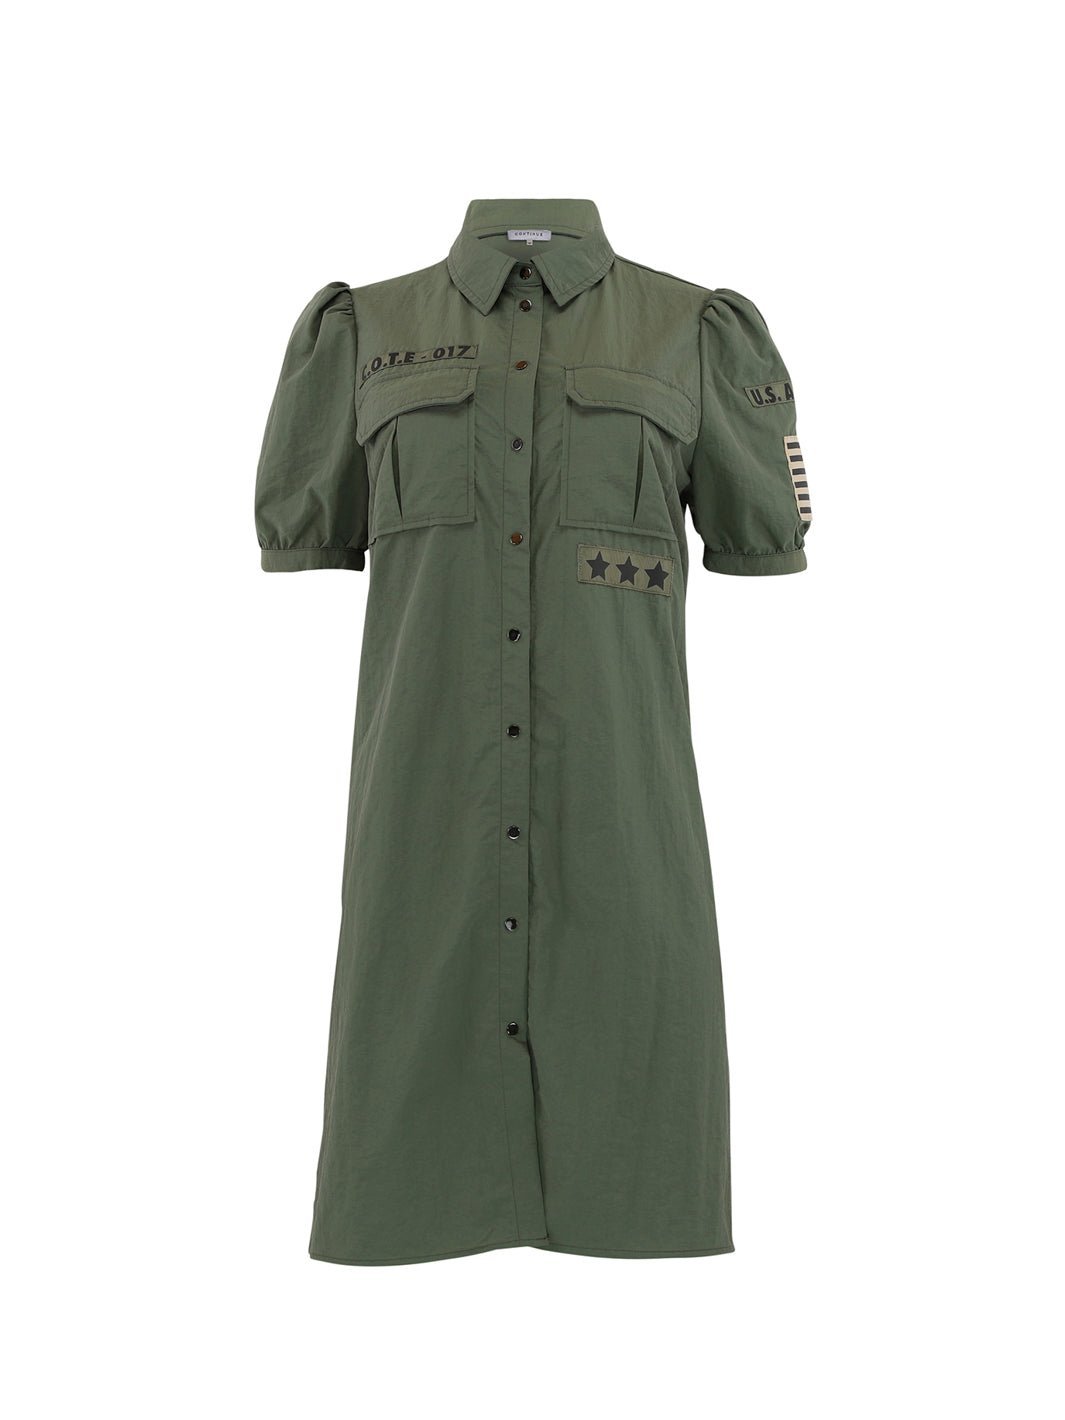 Continue Mili patch dress SS army - Online-Mode